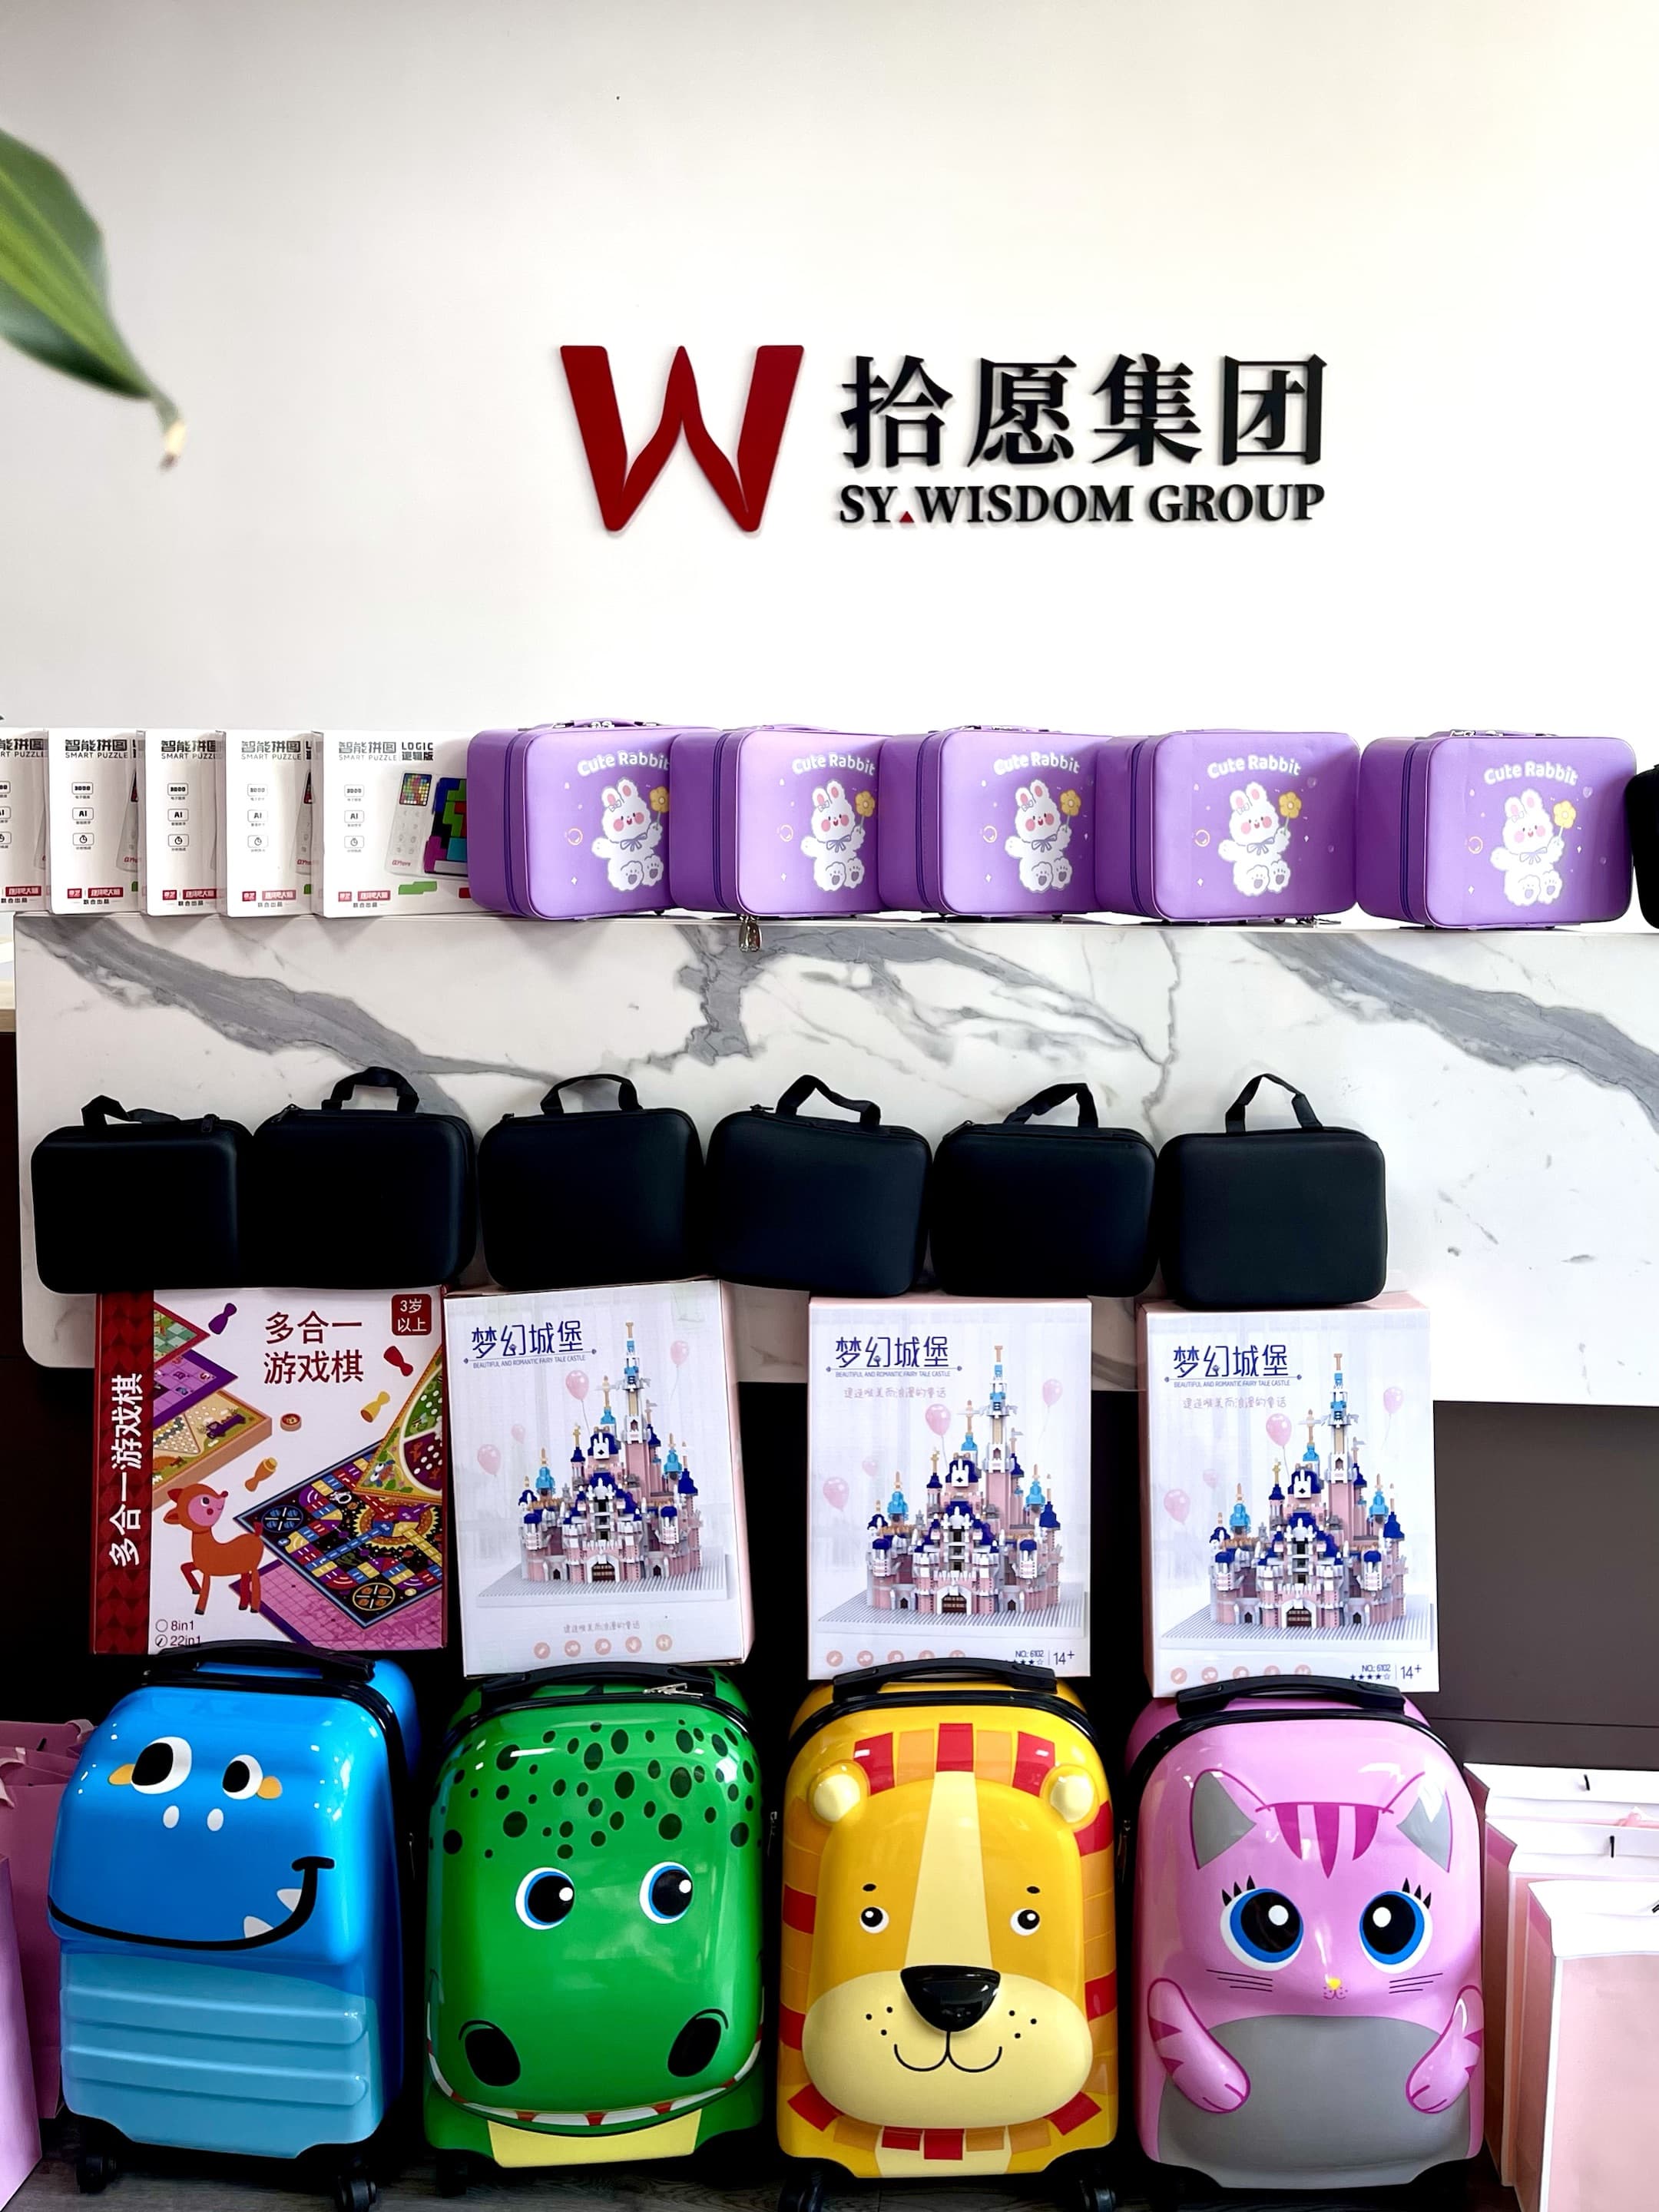 SY. Wisdom Group Commemorates Children's Day by Presenting Special Gifts to Employees' Children